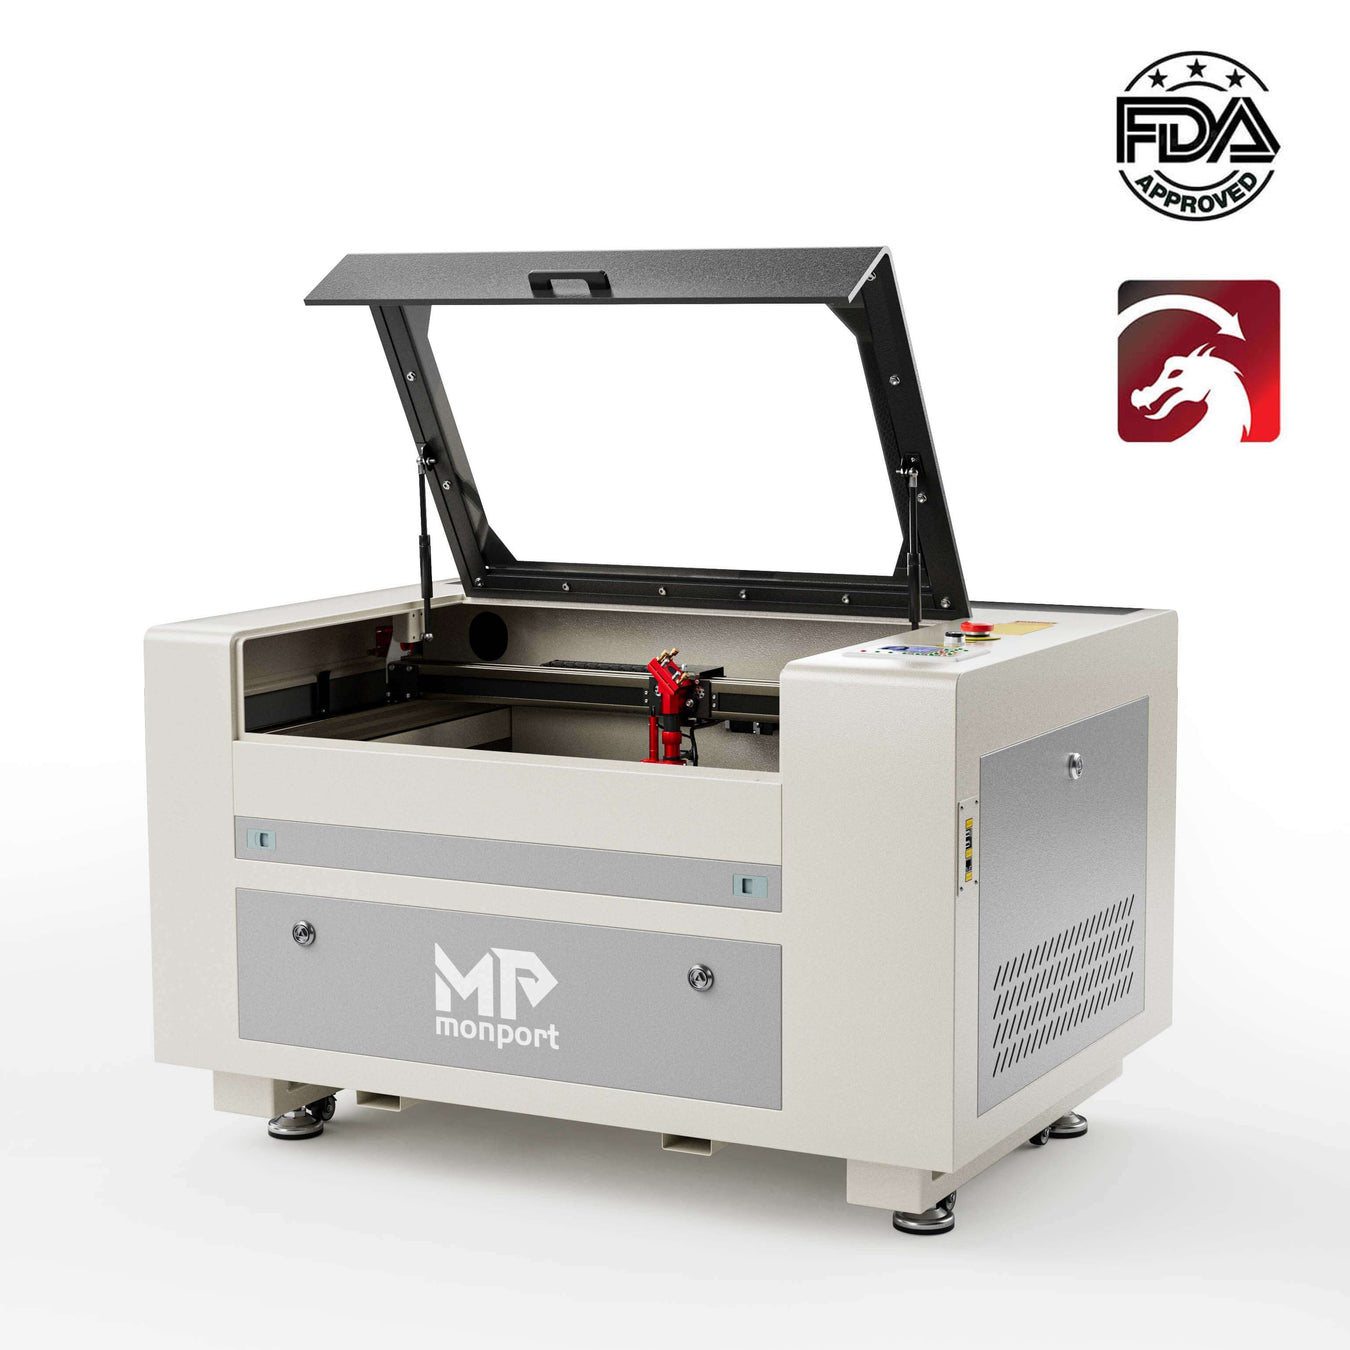 CO2 and Fiber Laser Engraving Machines